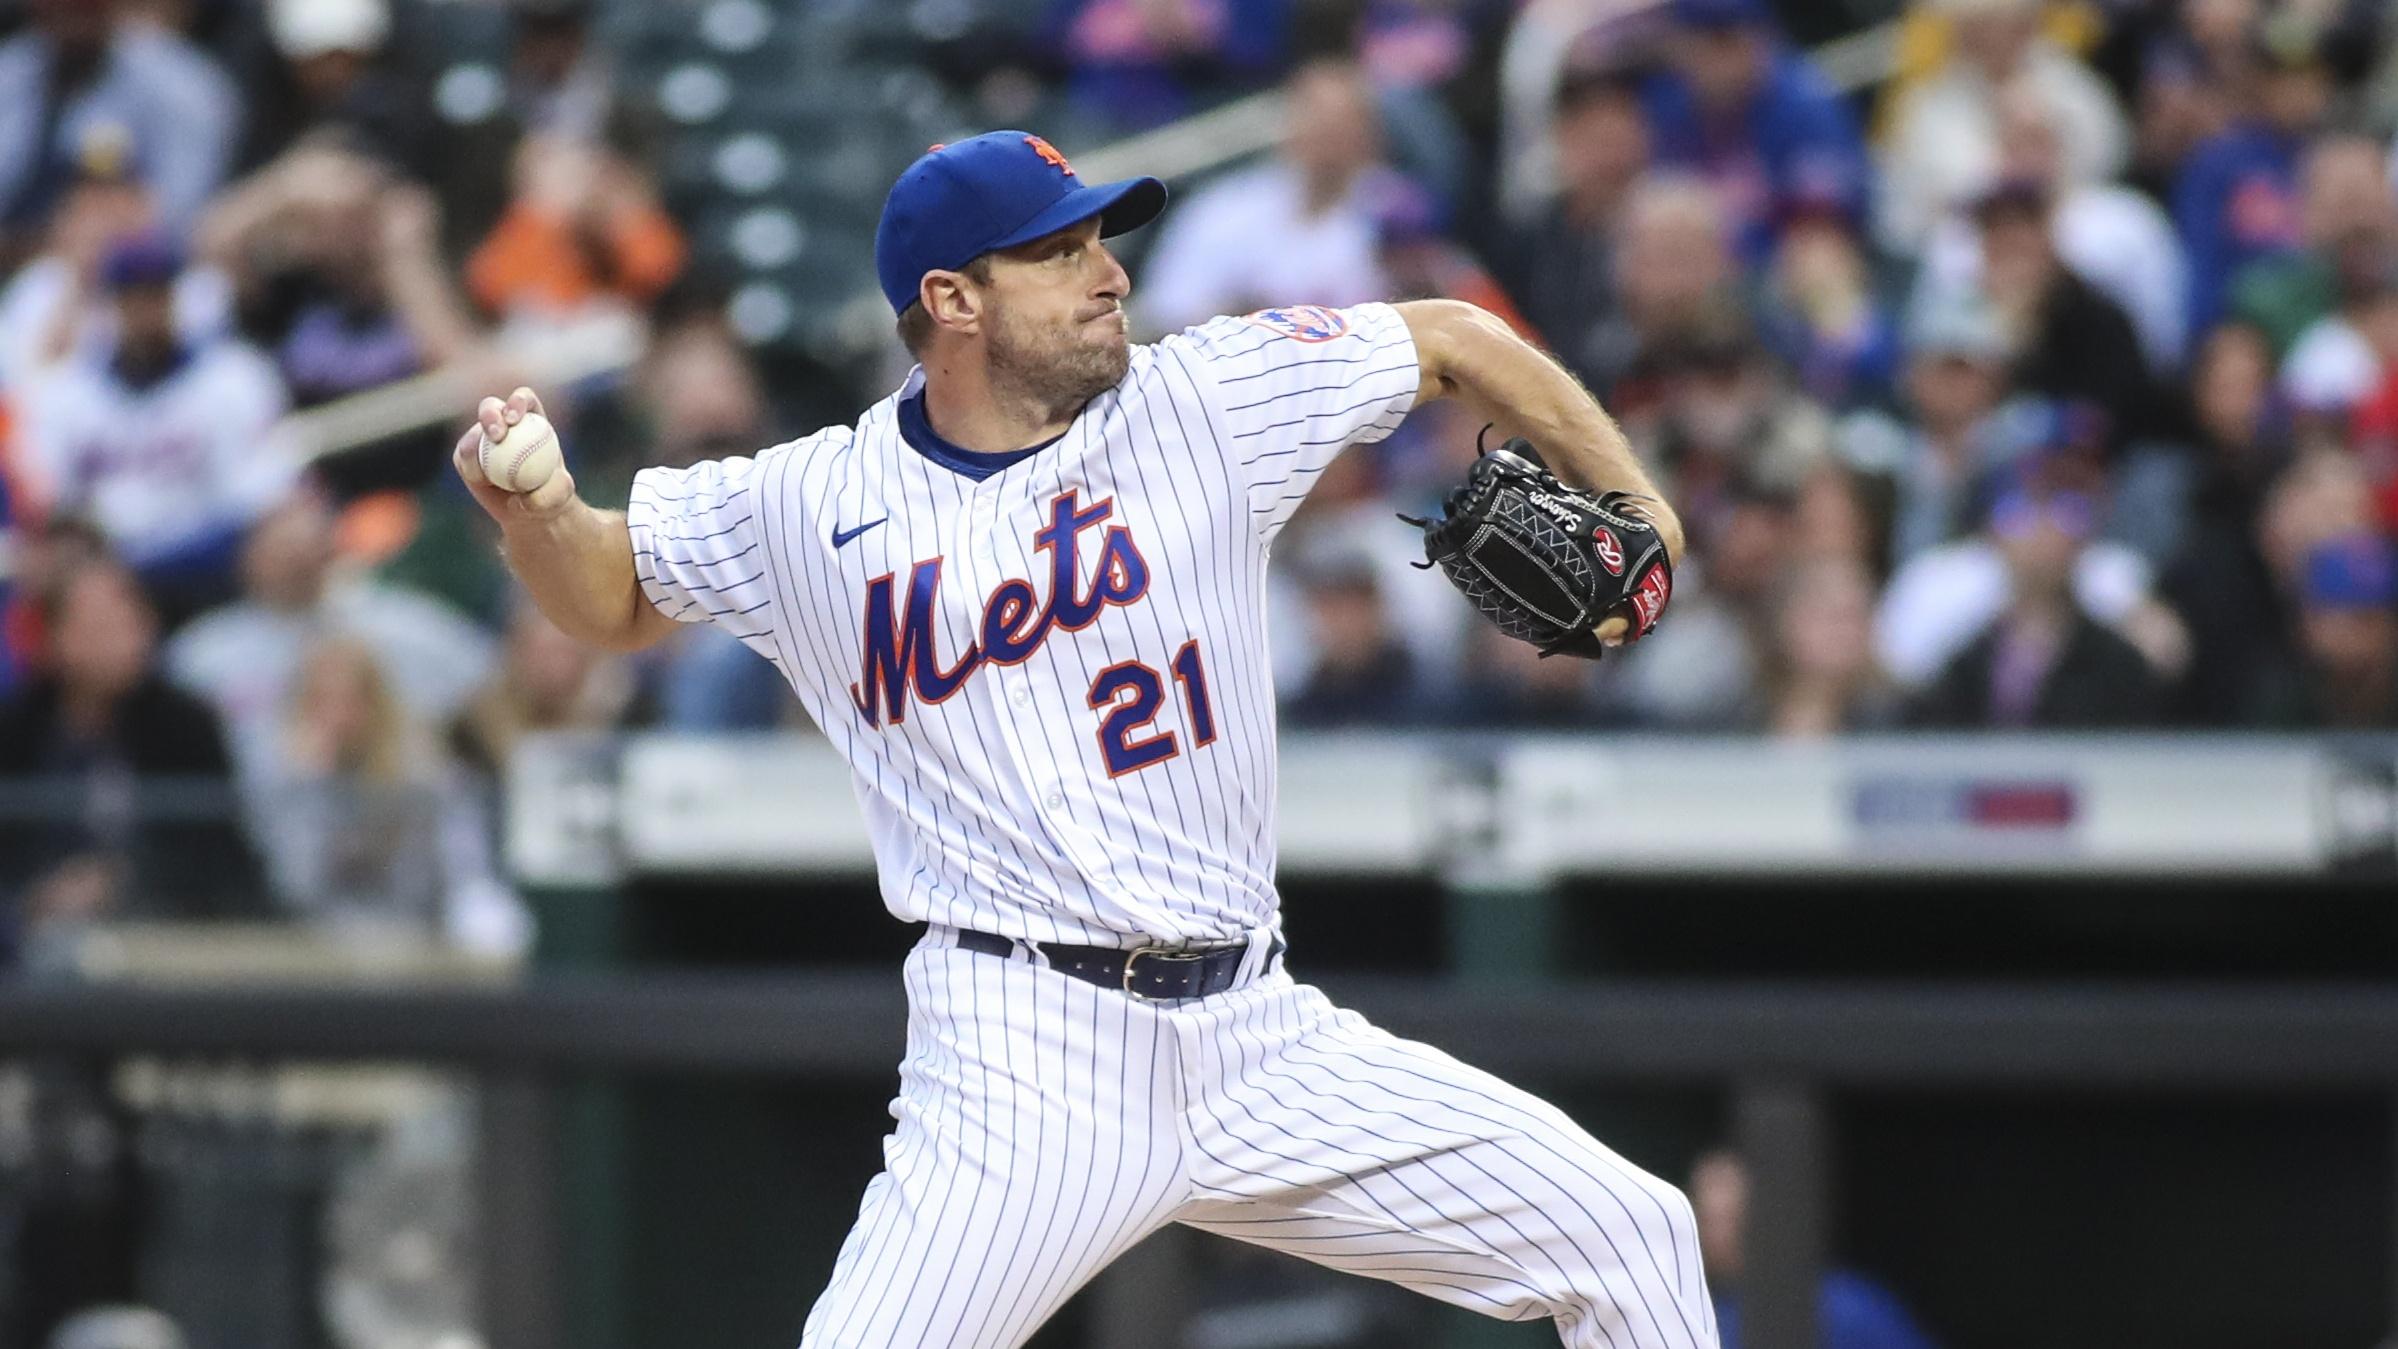 May 1, 2022; New York City, New York, USA; New York Mets starting pitcher Max Scherzer (21) pitches in the first inning against the Philadelphia Phillies at Citi Field. Mandatory Credit: Wendell Cruz-USA TODAY Sports / © Wendell Cruz-USA TODAY Sports